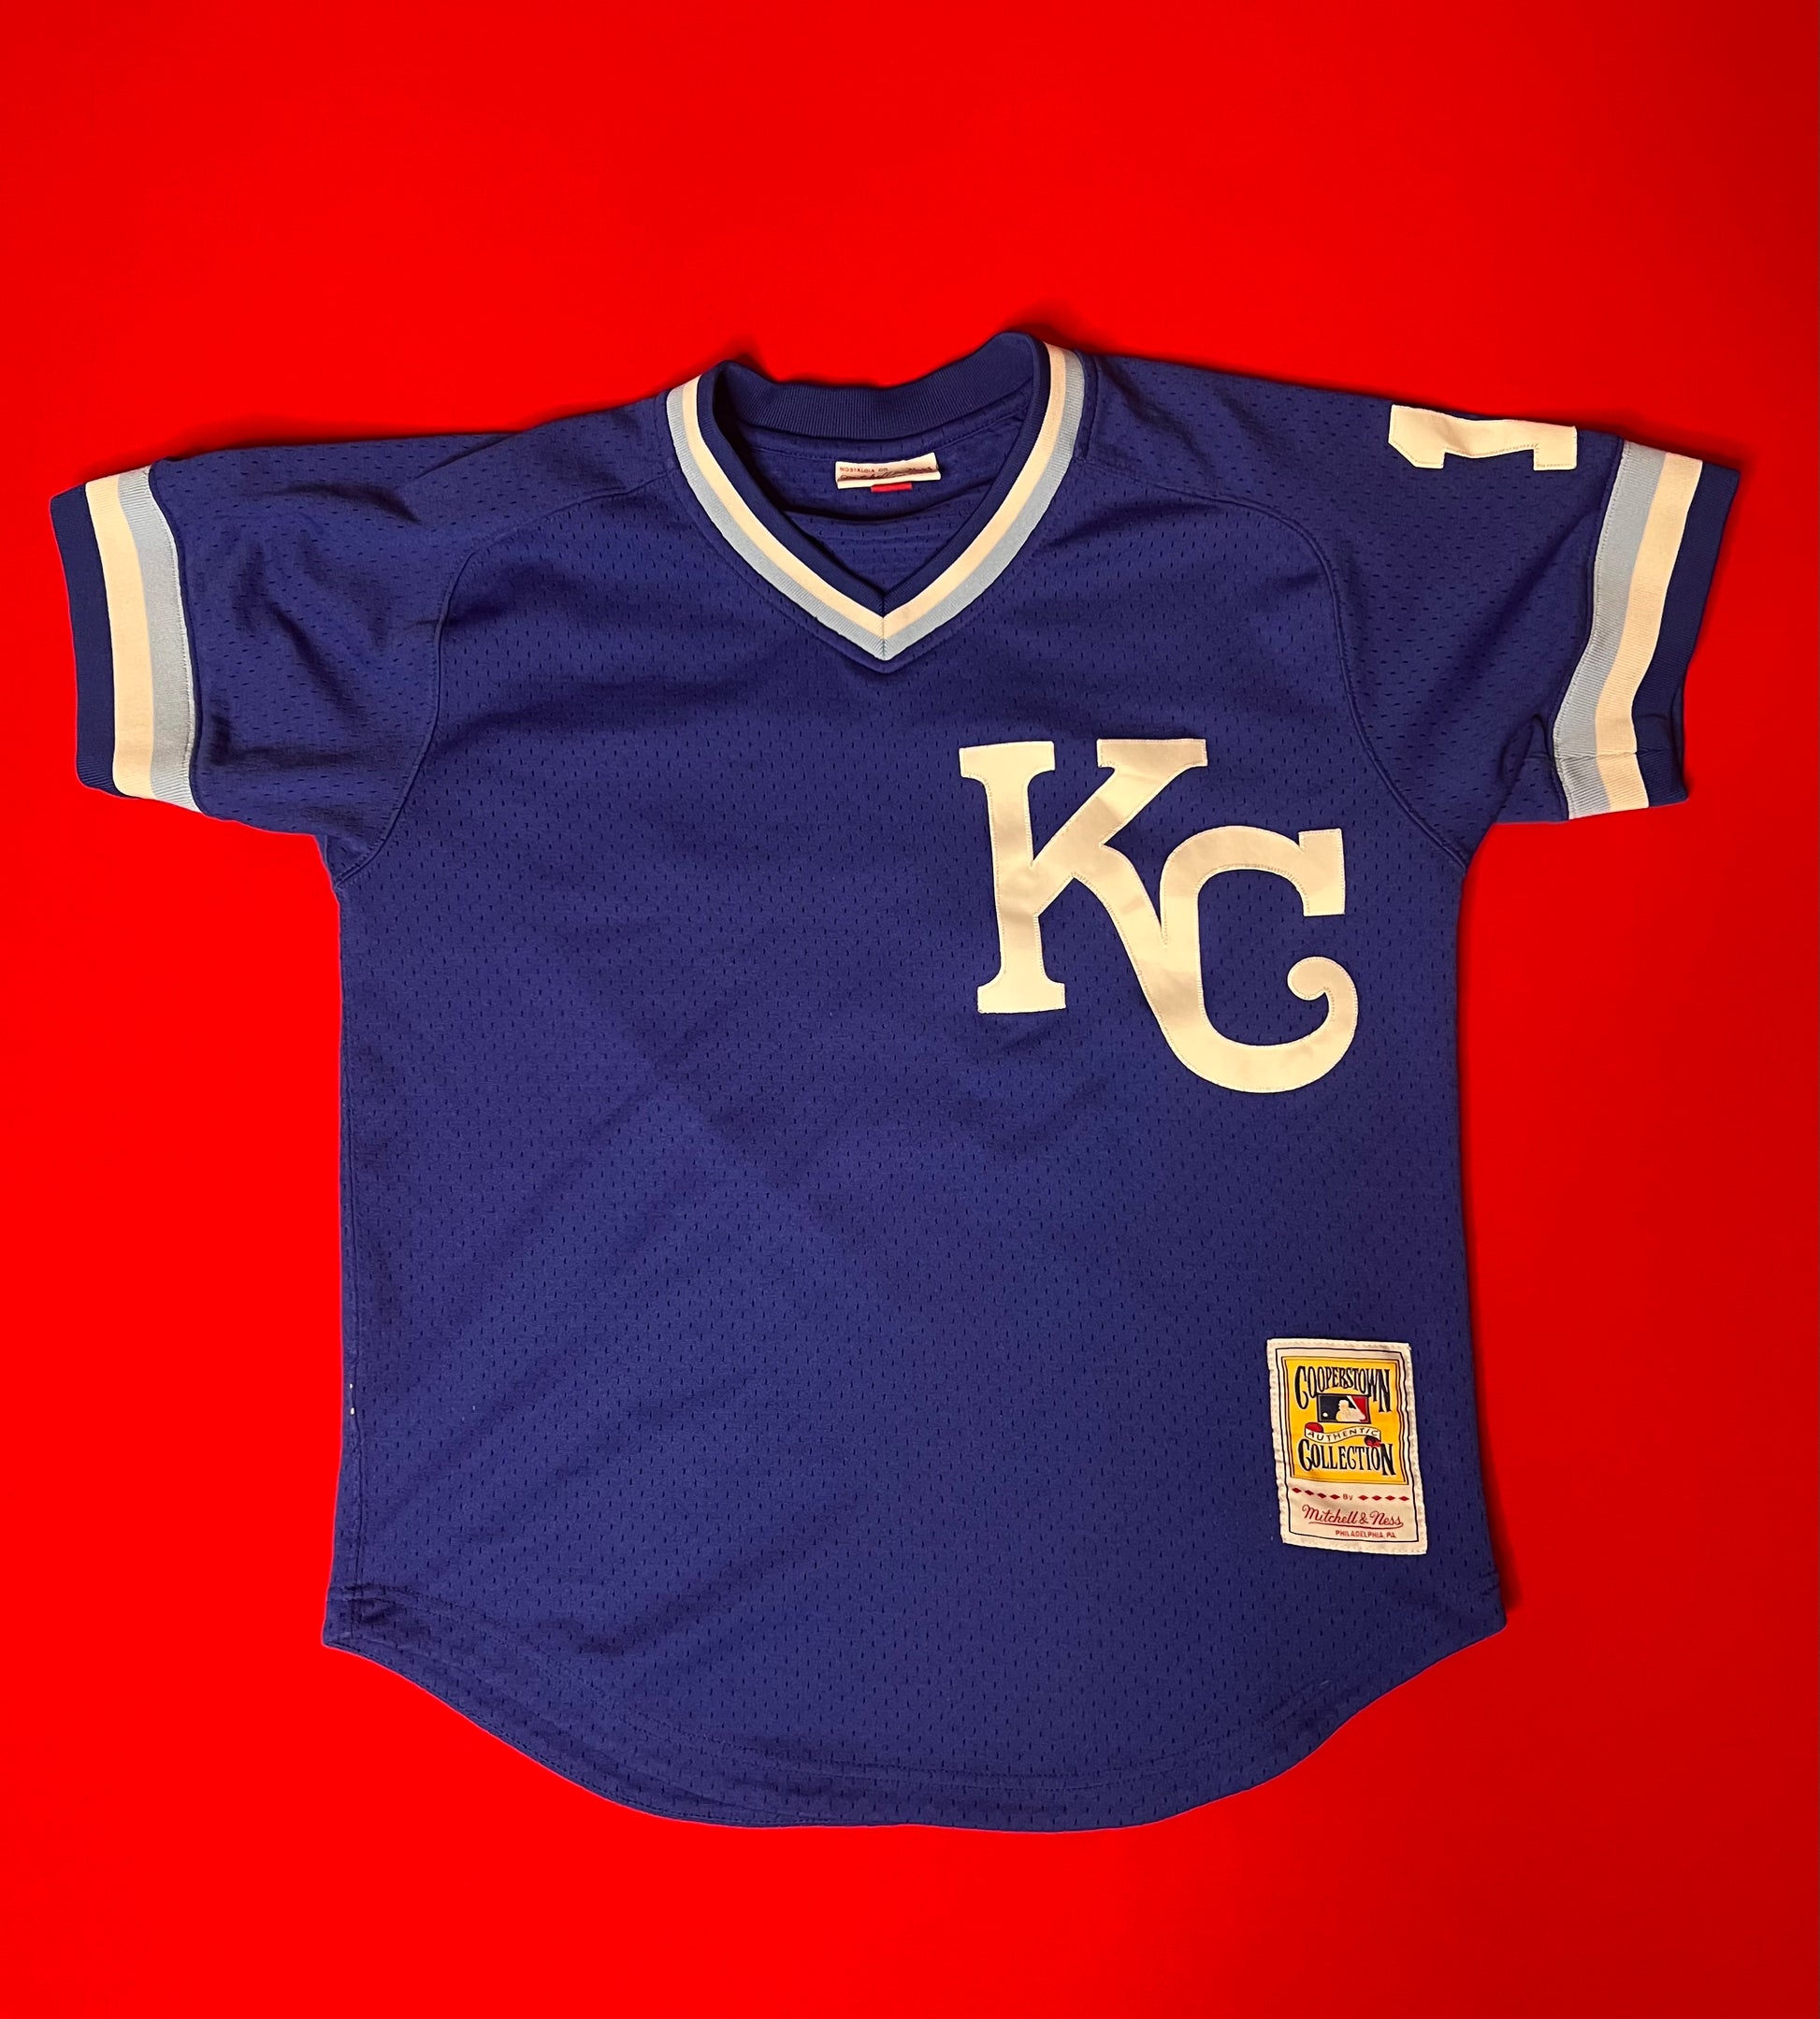 mitchell and ness royals